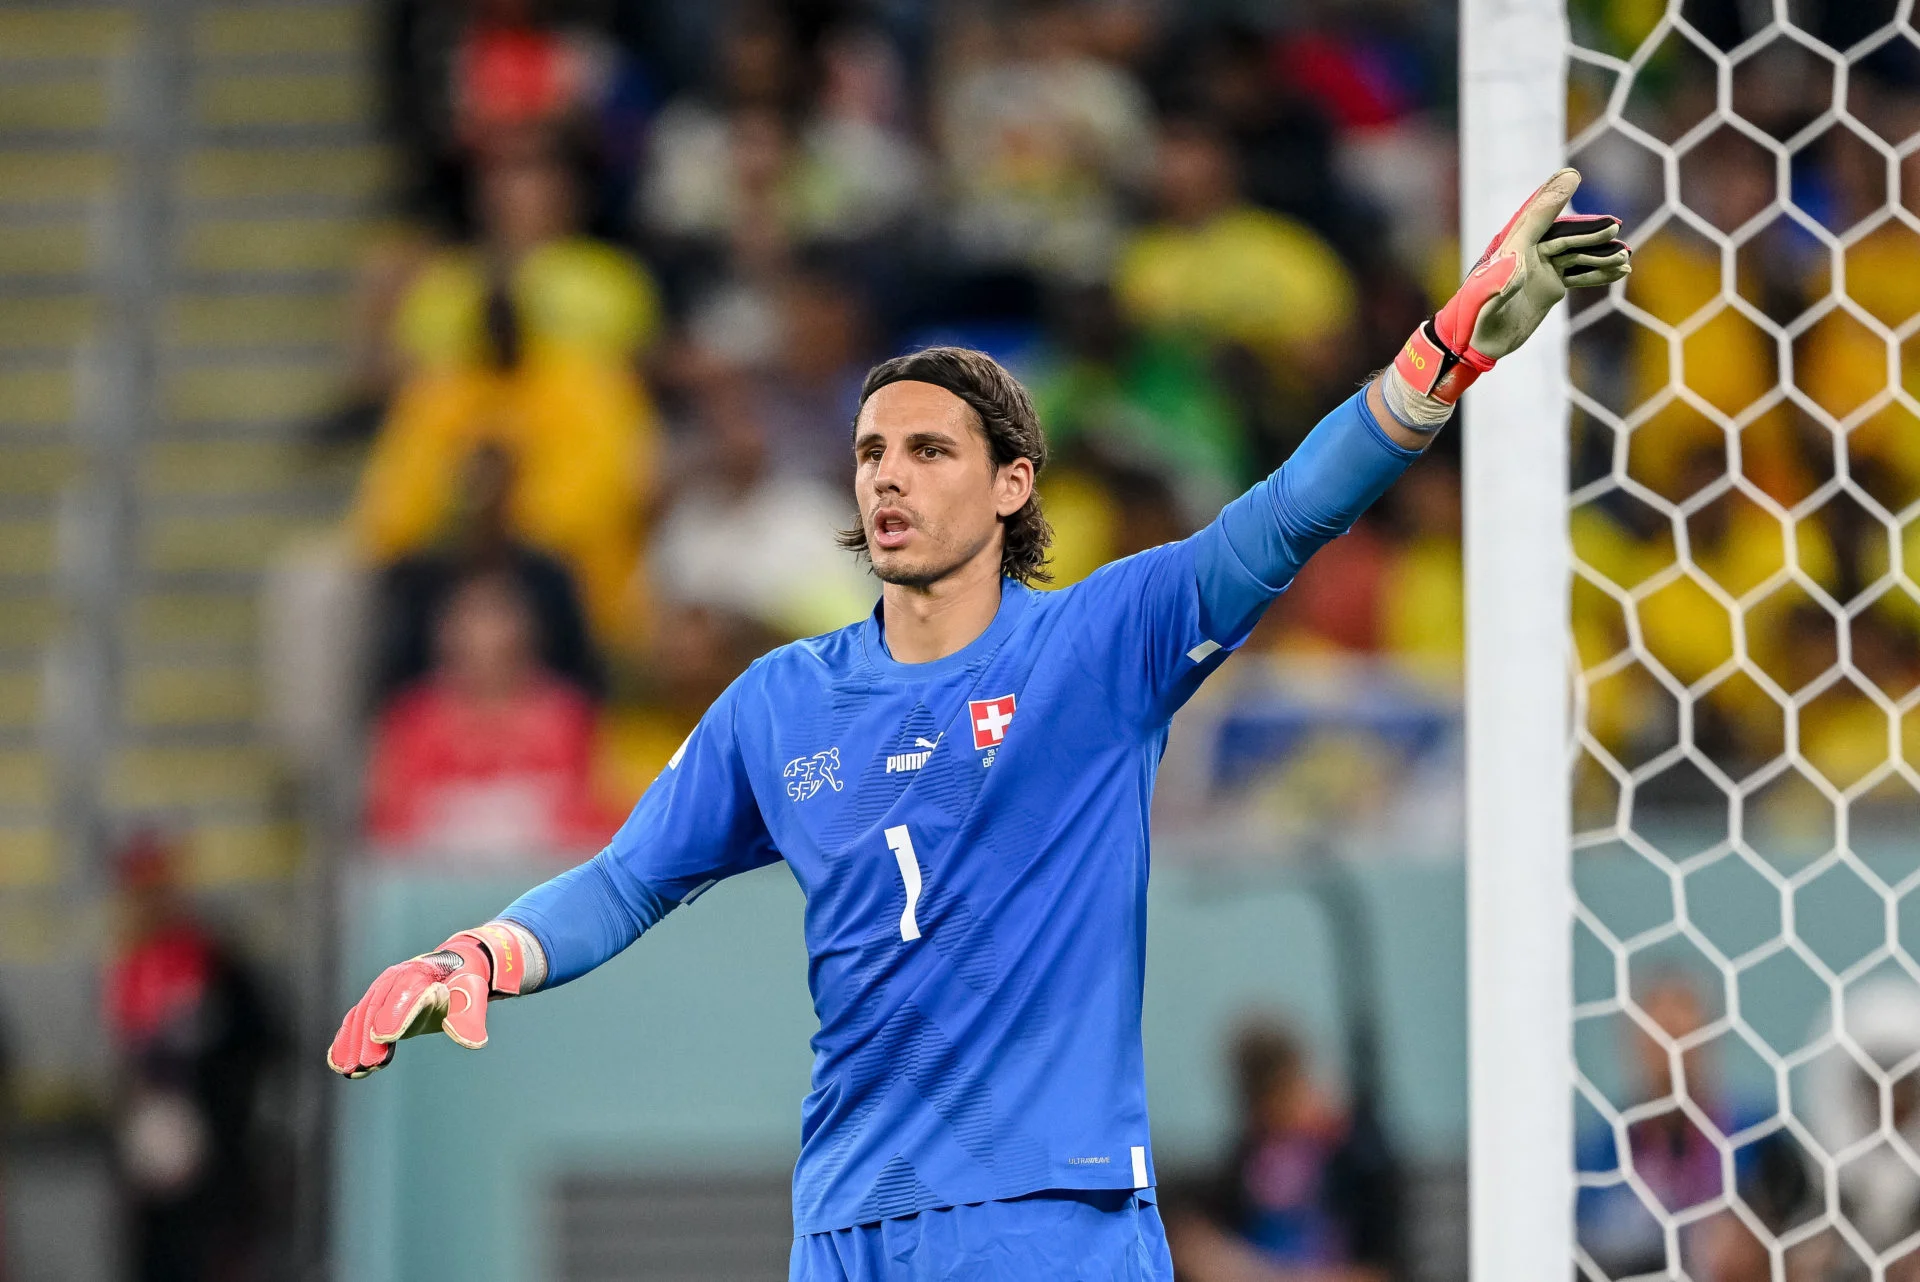 Inter have completed the acquisition of Yann Sommer. The goalkeeper arrived in Italy Sunday and completed the medicals and inked a three-year contract.